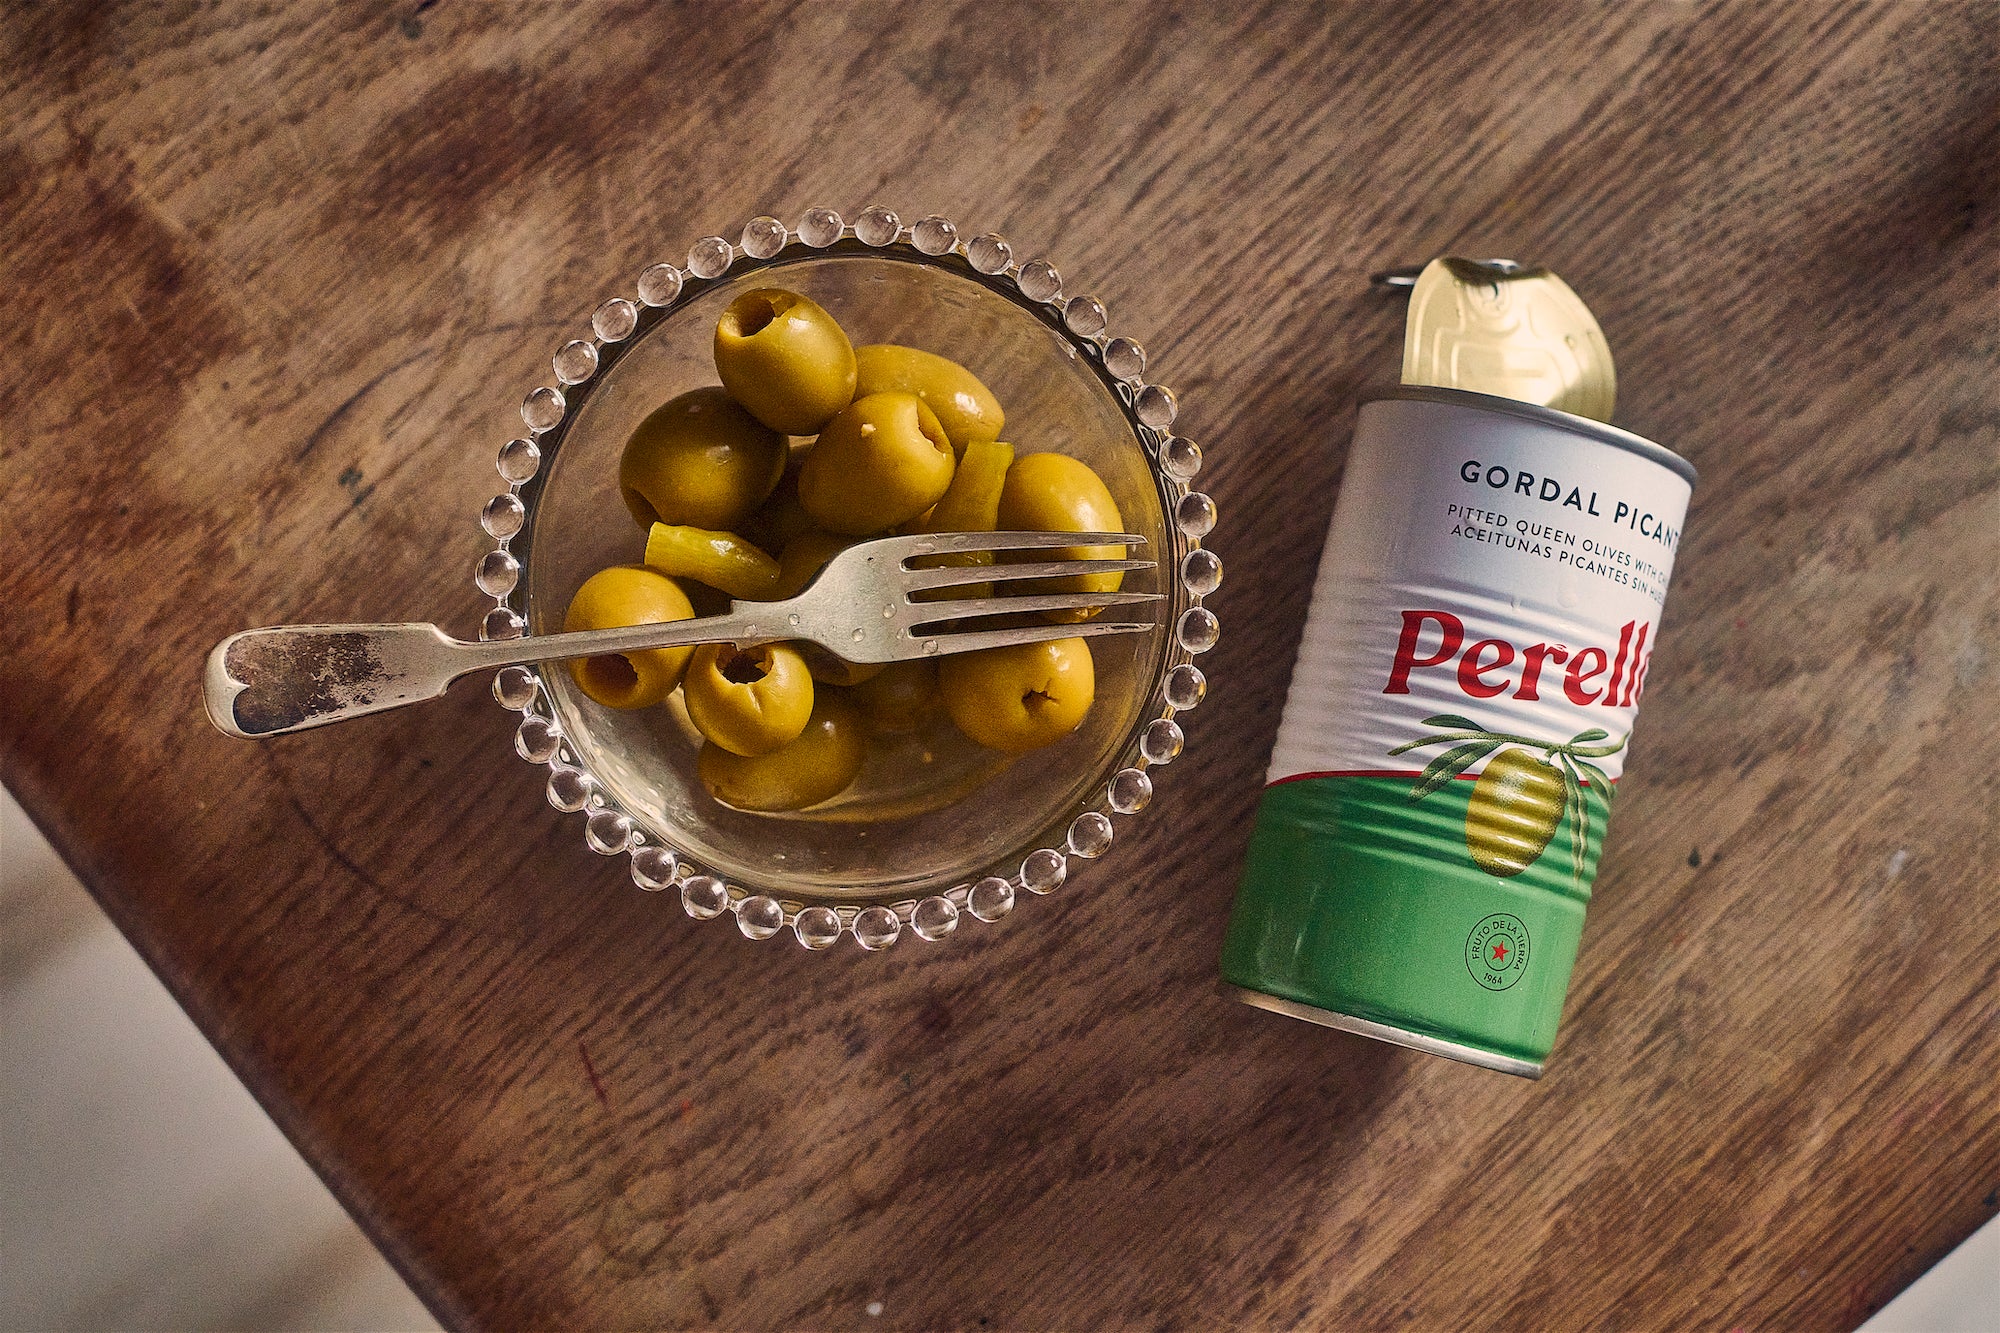 Perello Olives in a bowl ready for snacking